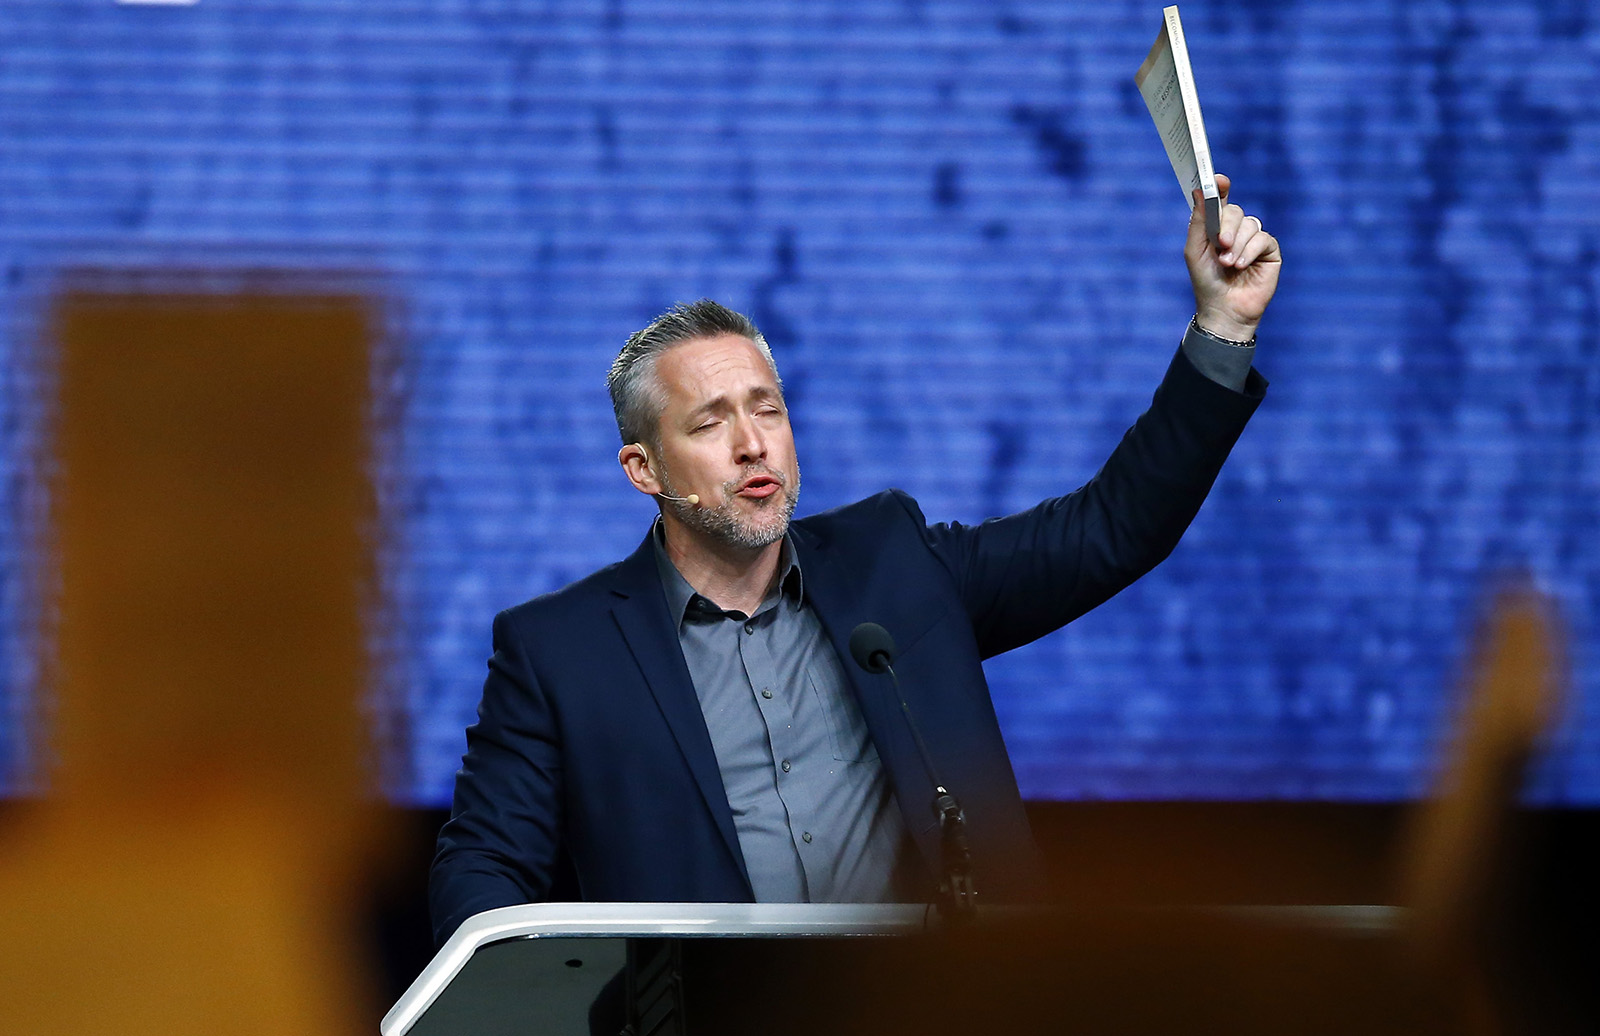 SBC President J.D. Greear offers a prayer to the church for healing from sexual abuse during the annual meeting of the Southern Baptist Convention at the BJCC, June 12, 2019 in Birmingham, Ala. RNS photo by Butch Dill.